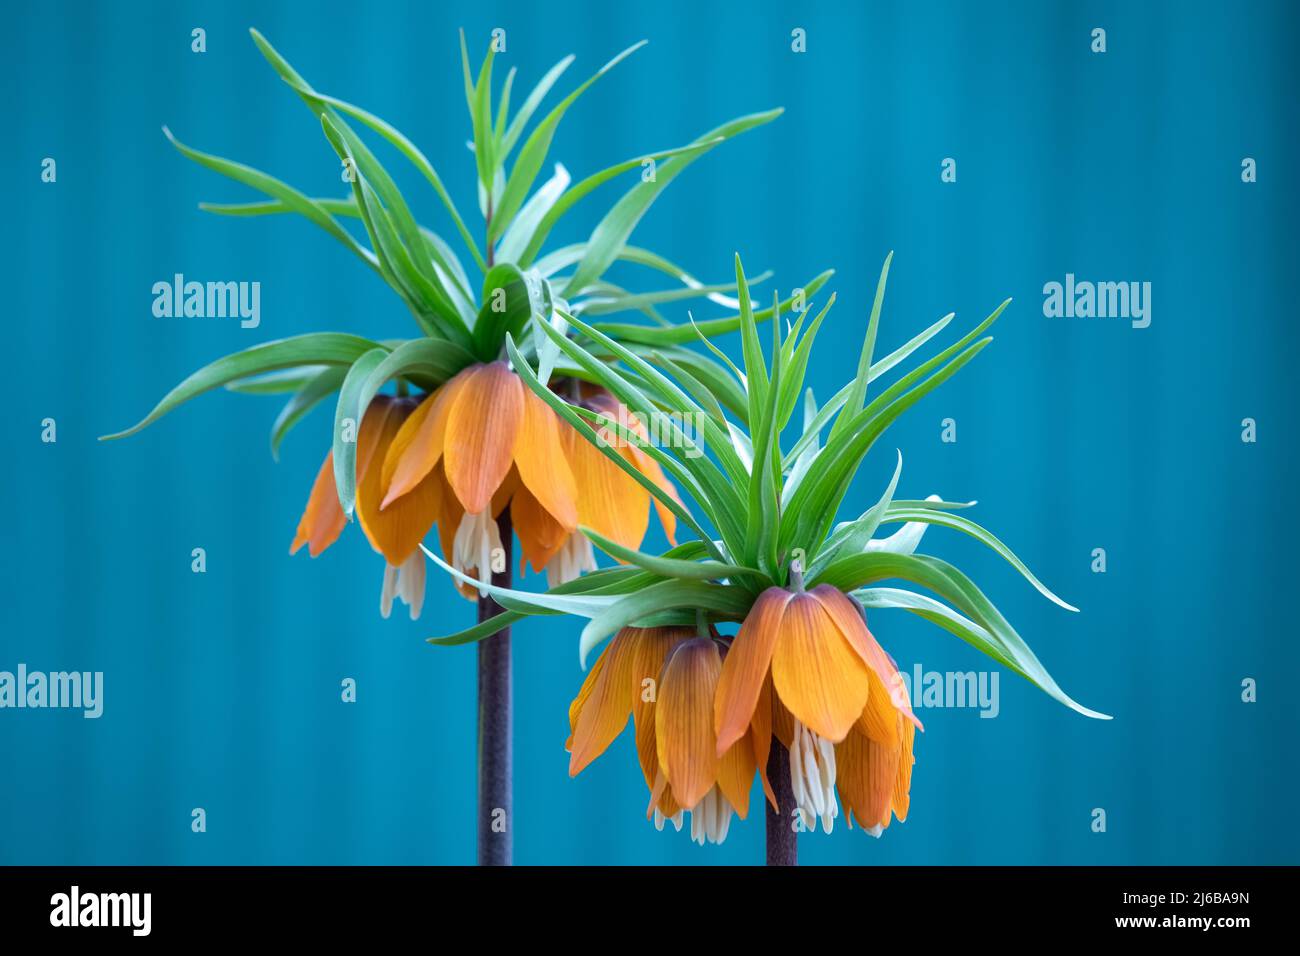 Fritillaria imperialis, crown imperial, fritillary or kaiser crown, is a species of flowering plant in the lily family. Fritillaria imperialis, close- Stock Photo